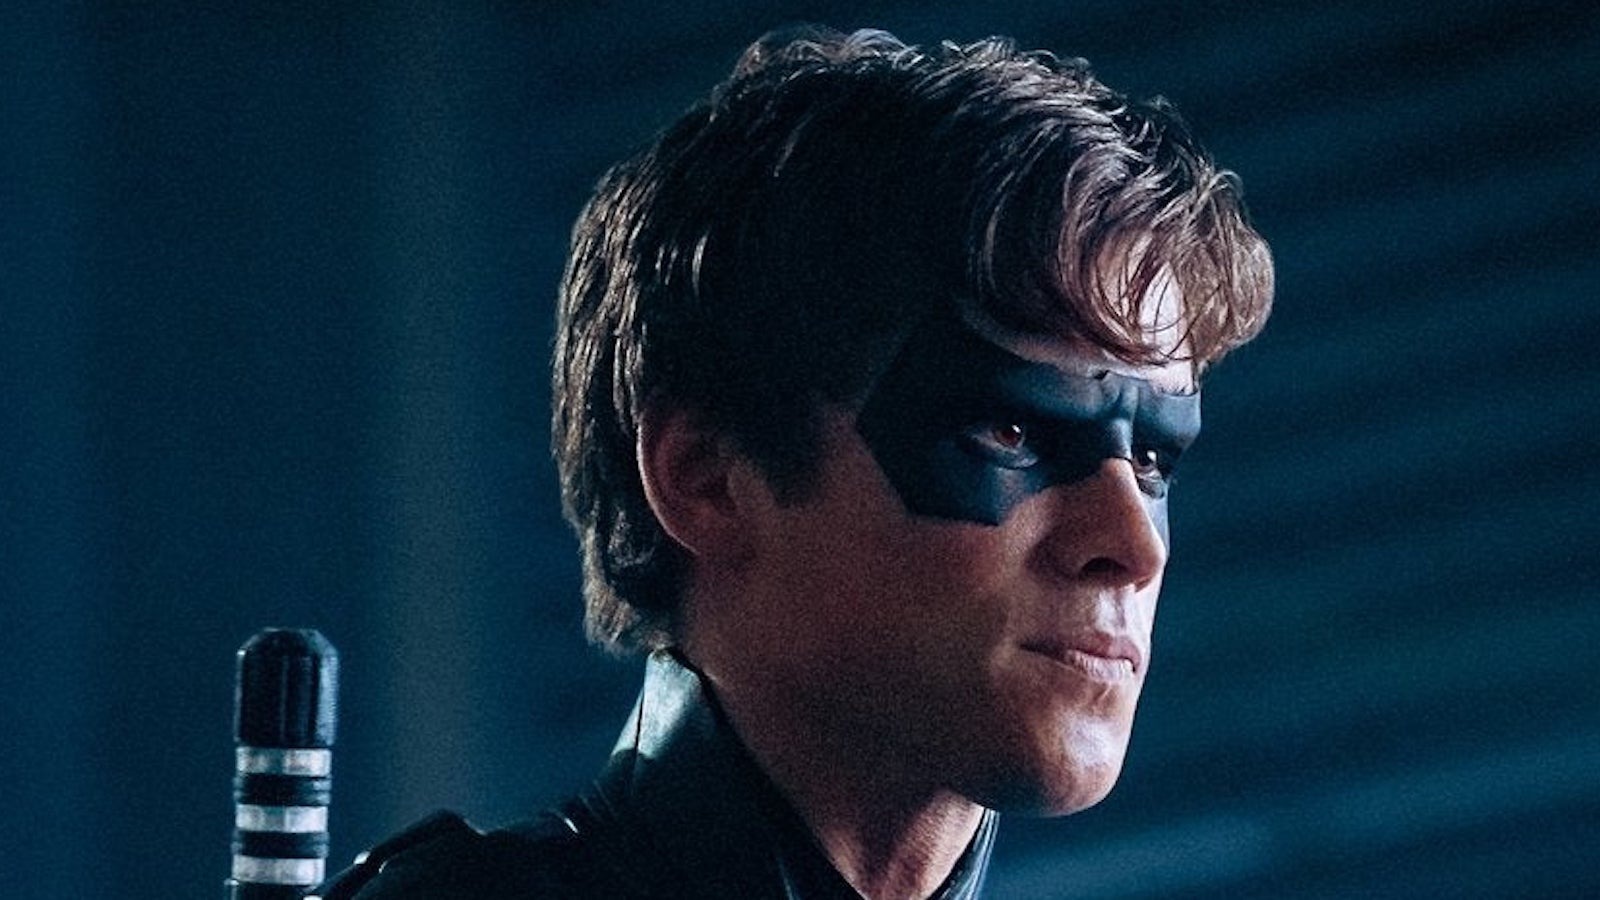 Titans Season 3 First Look Image Reveal A Pair Of Iconic Characters